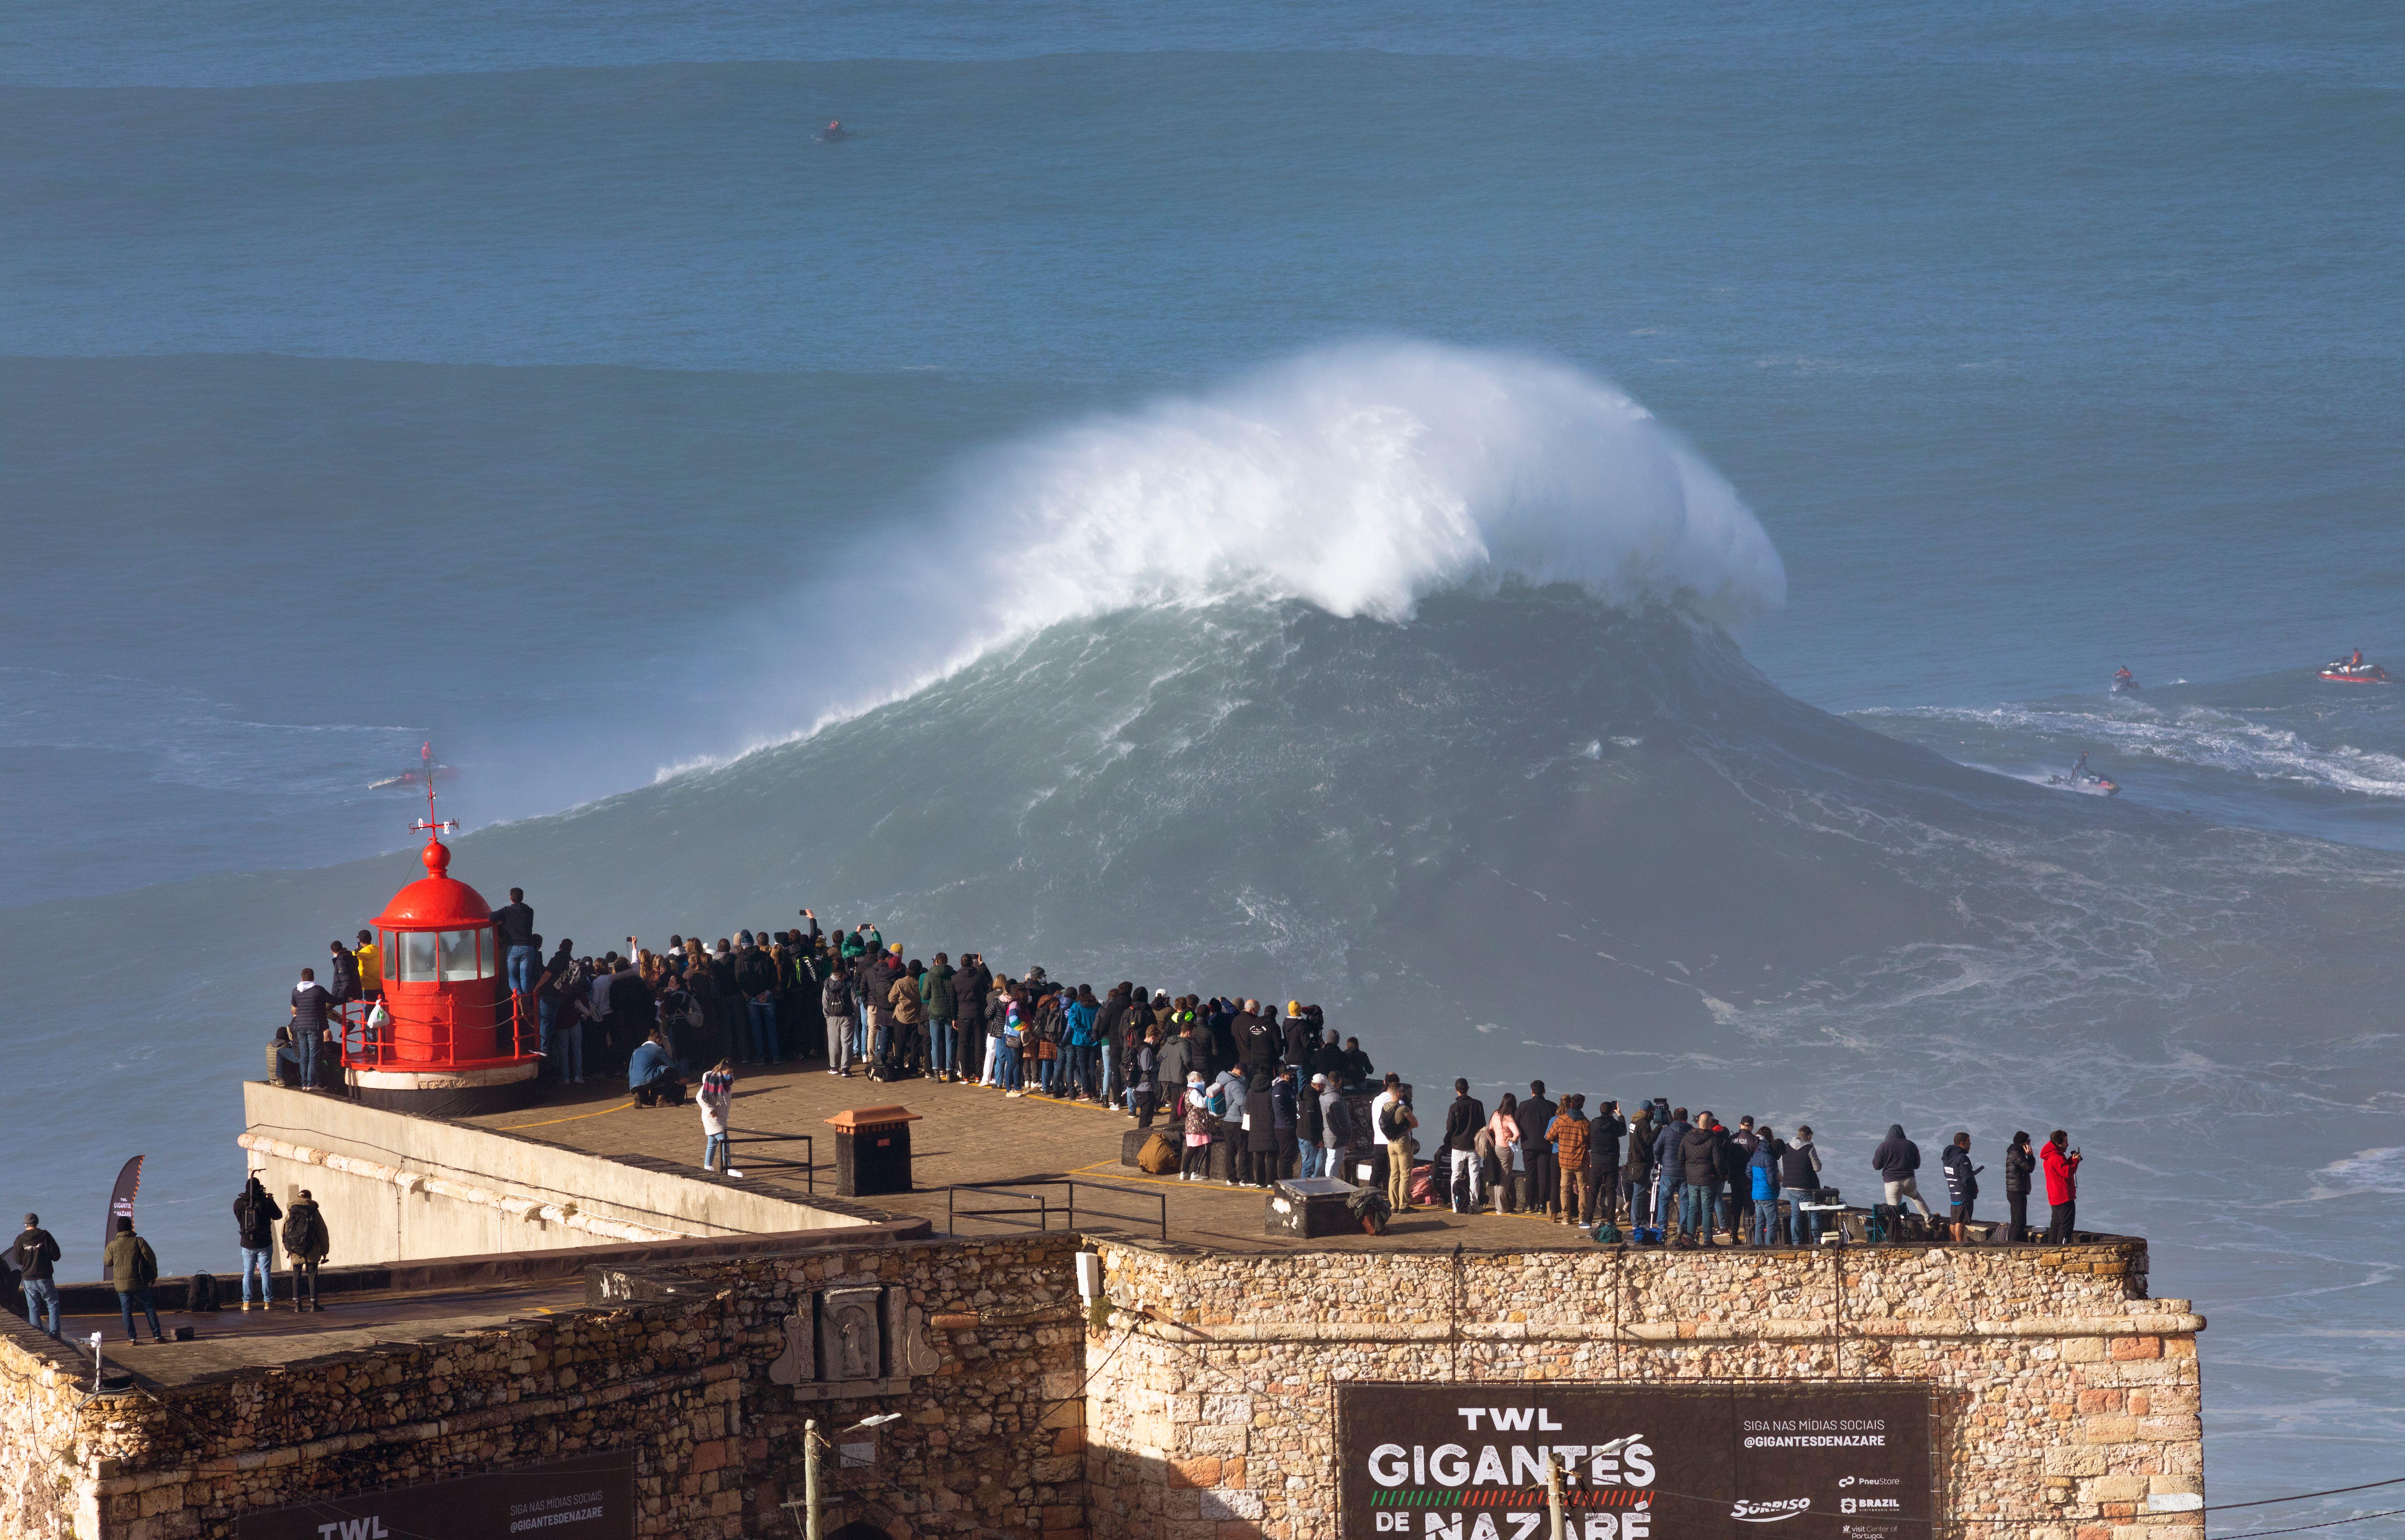 Europe, Portugal, Oeste Region, Nazaré, Crowd watching the Huge Waves from Forte de Sao Miguel Arcanjo during Free Surfing Event 2022